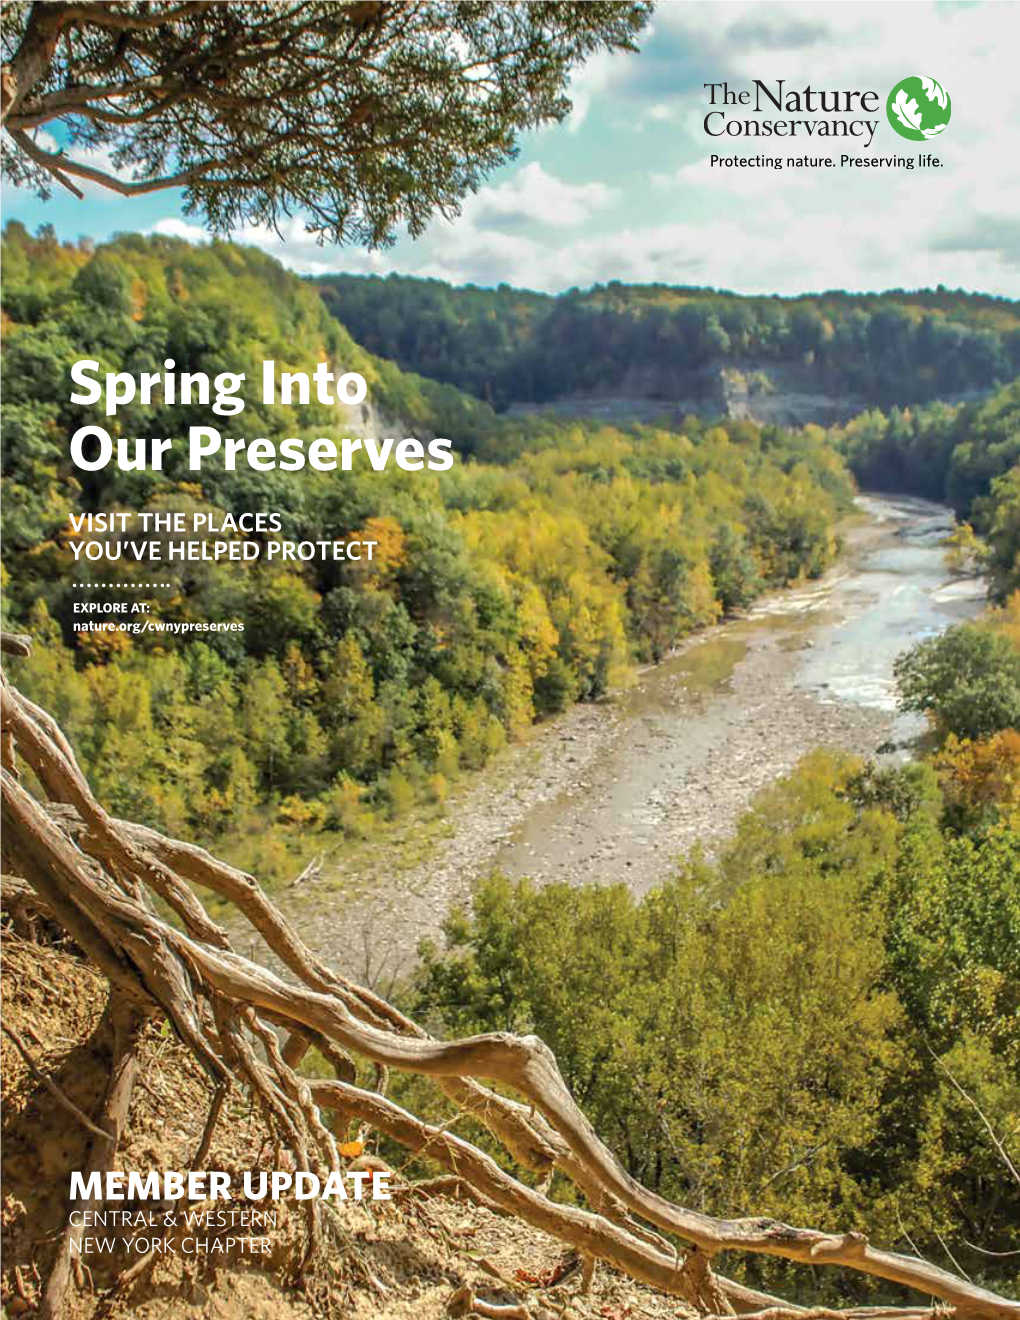 Spring Into Our Preserves VISIT the PLACES YOU’VE HELPED PROTECT